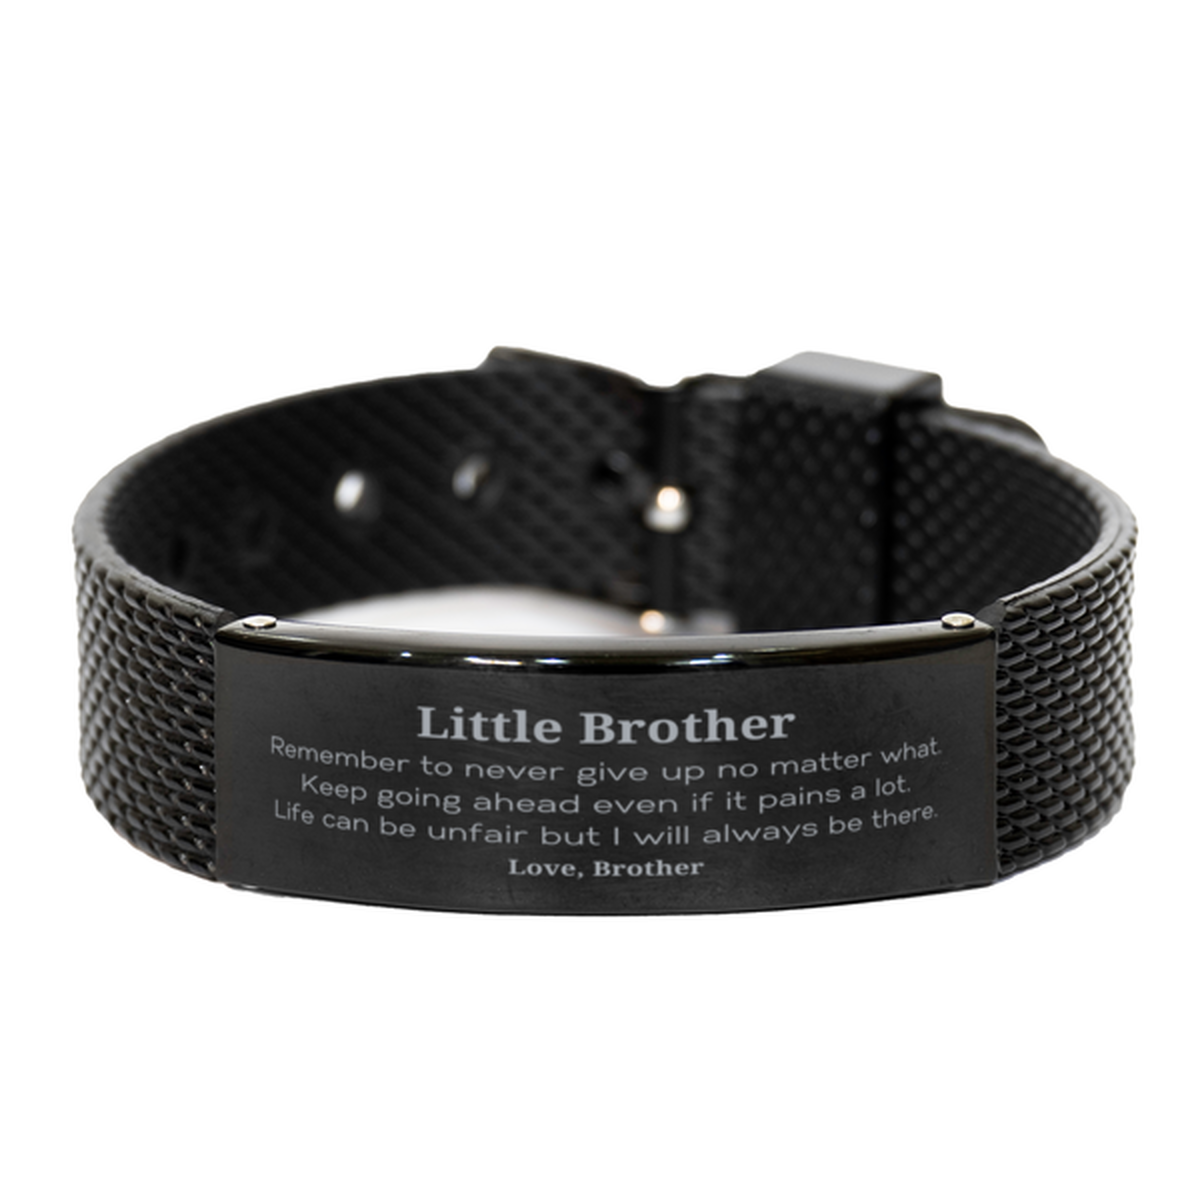 Little Brother Motivational Gifts from Brother, Remember to never give up no matter what, Inspirational Birthday Black Shark Mesh Bracelet for Little Brother